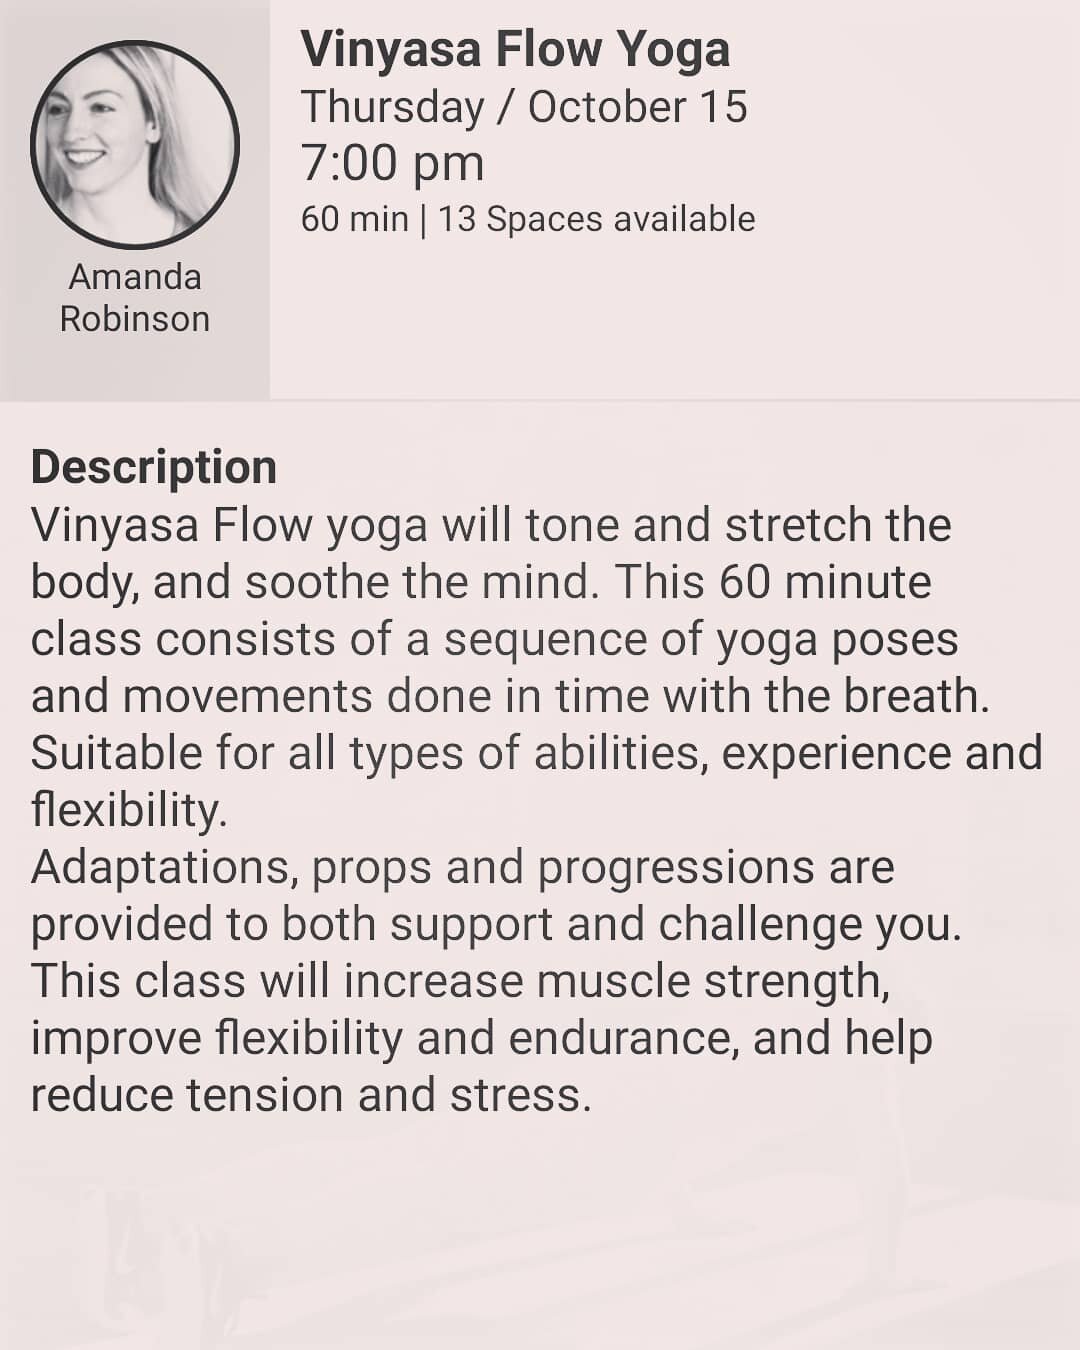 Super excited to be back teaching at my favourite gym  @galvanized_fitness 😊

Thursday Night Yoga -  commencing 15 October.